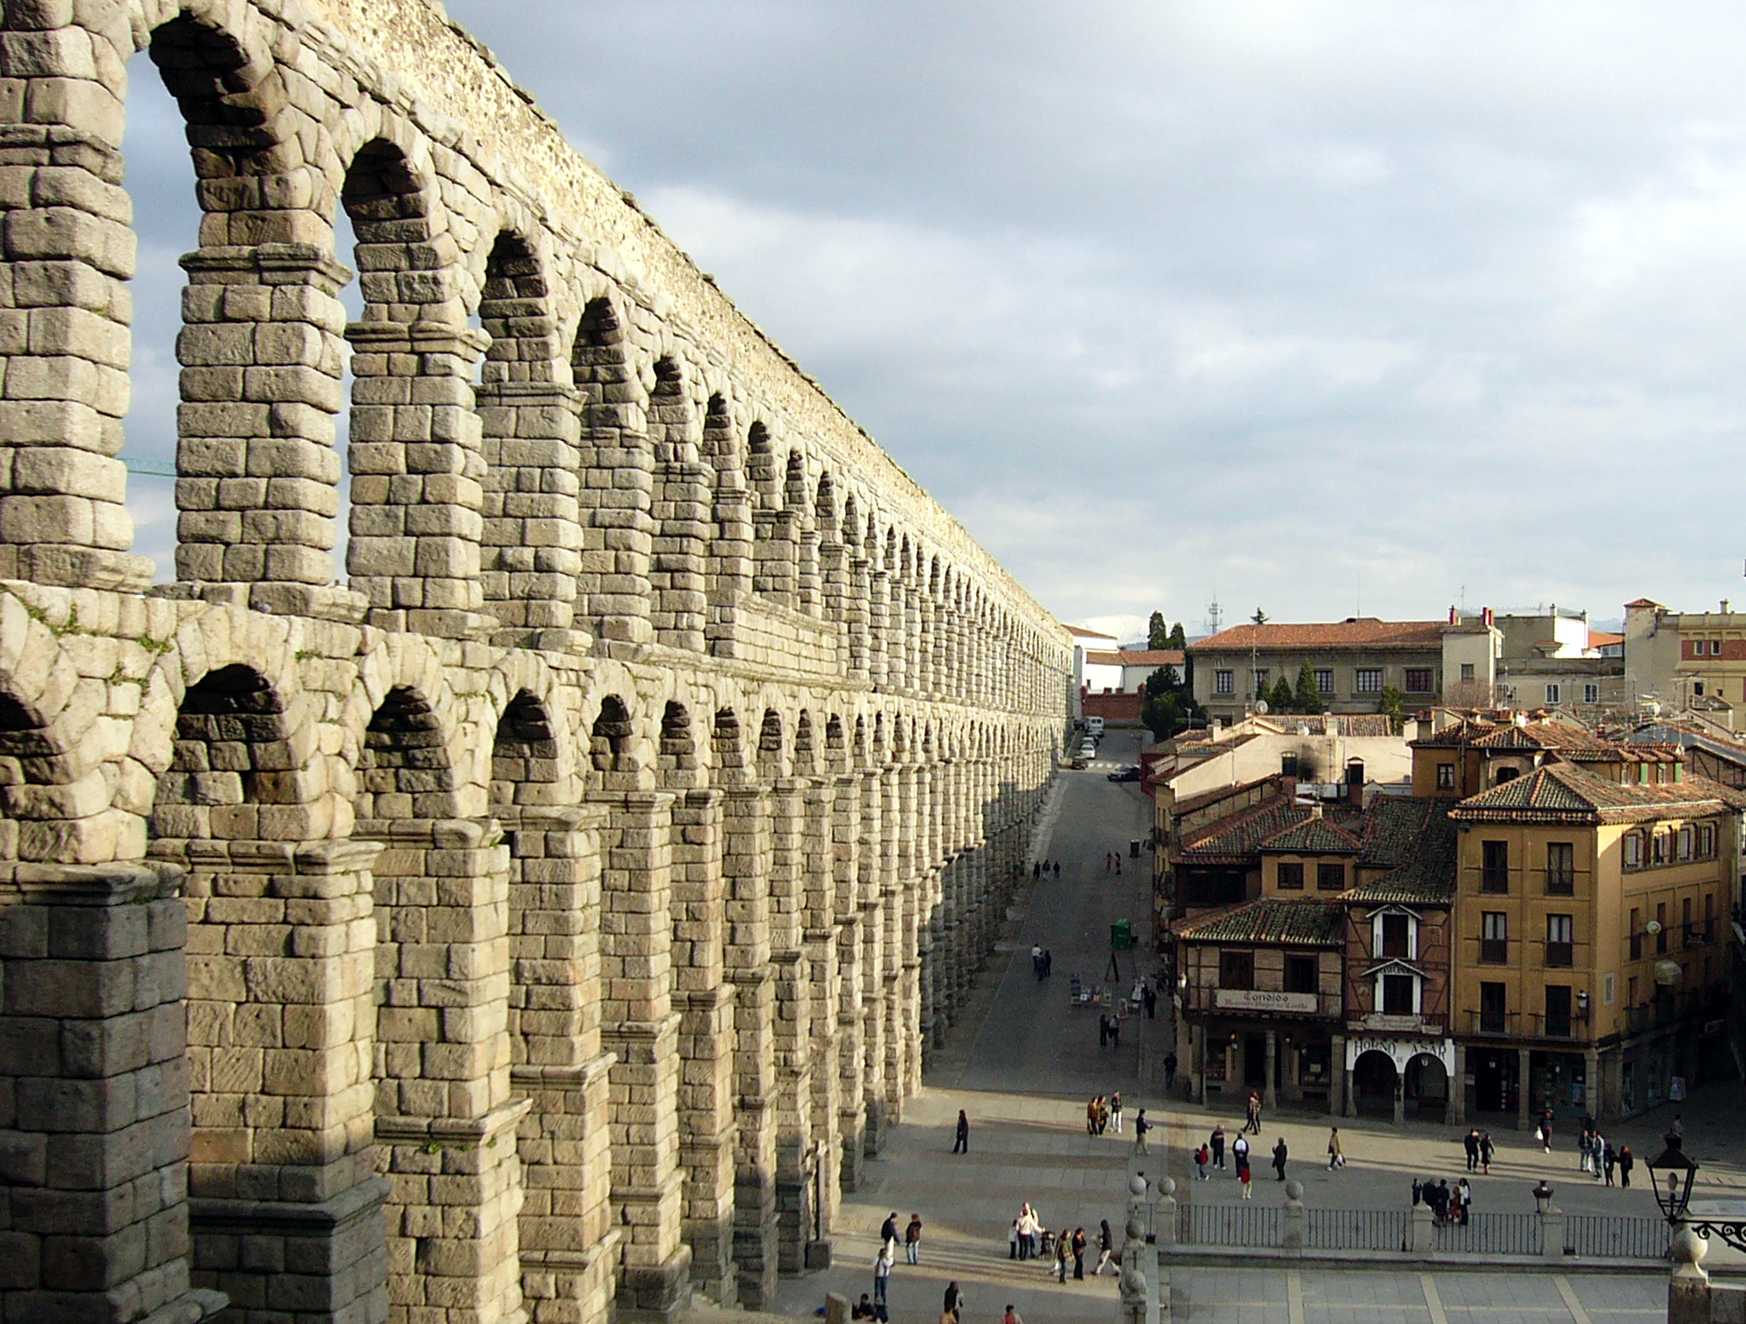 _images/Rom-AcueductoSegovia.png